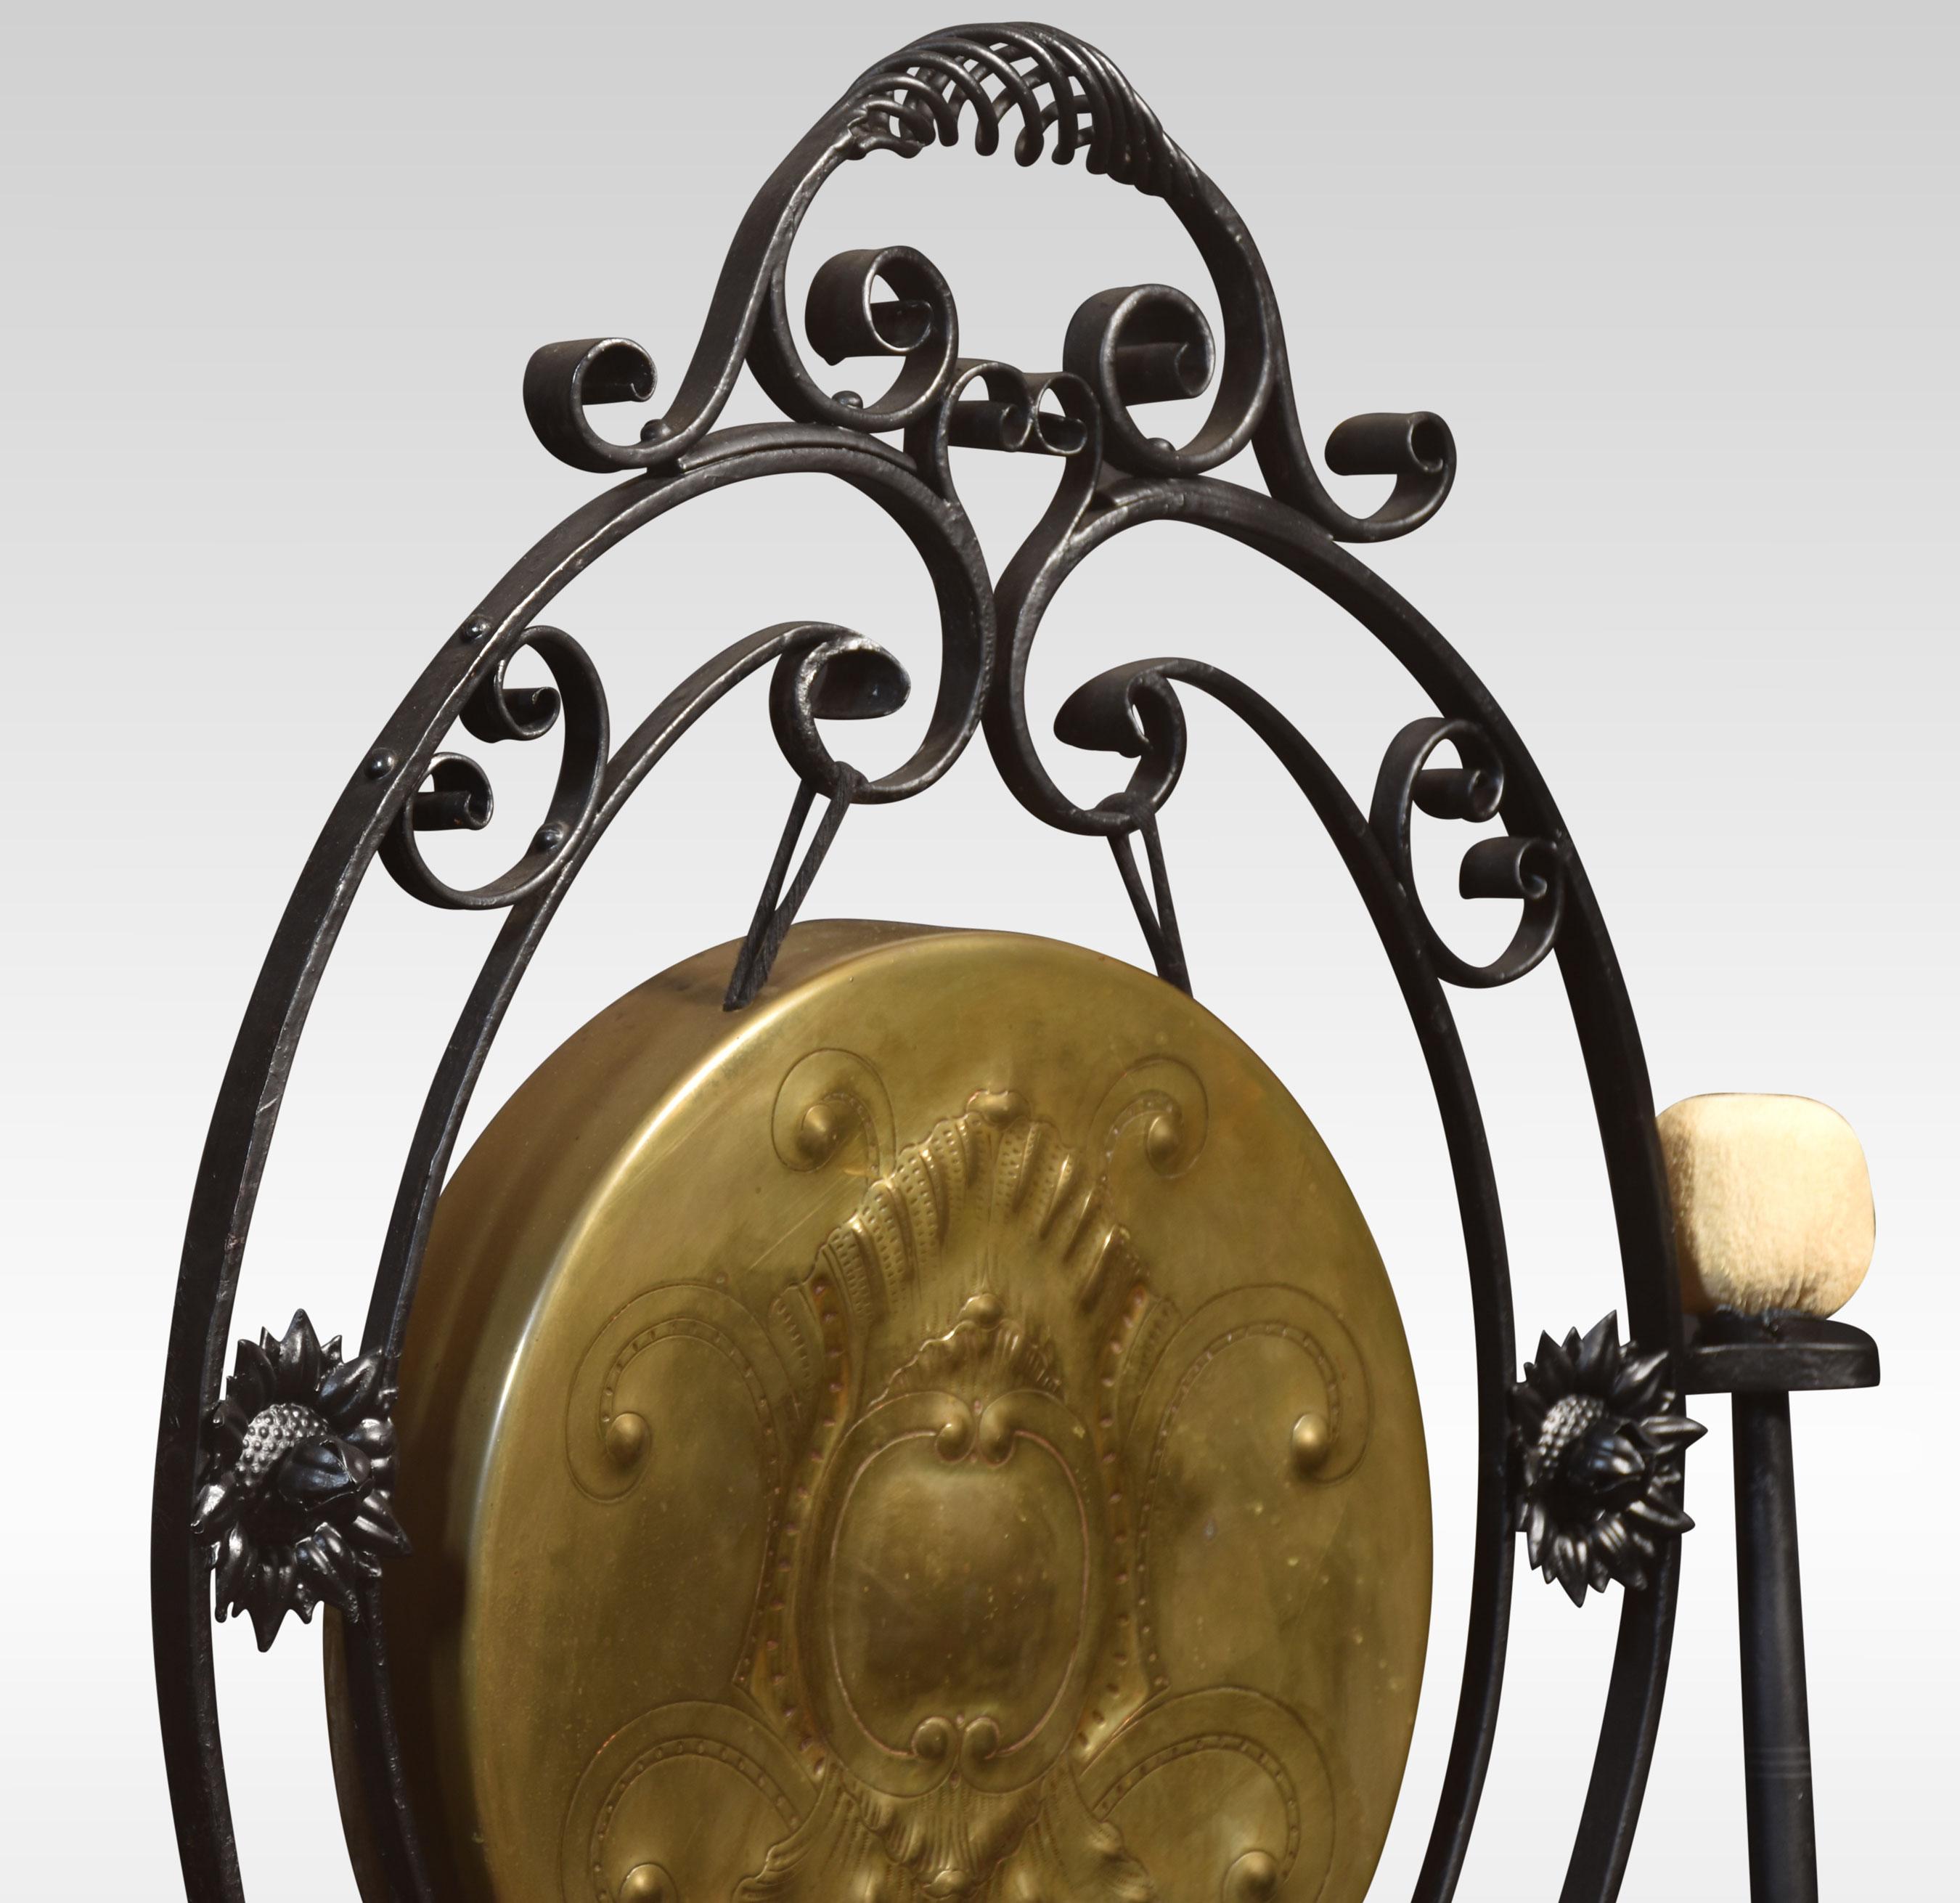 Art Nouveau cast Iron dinner gong the decorative Fram with flower heads and scrolling decoration. Supporting the original brass gong, together with beater.
Dimensions
Height 33.5 Inches
Width 26.5 Inches
Depth 12 Inches